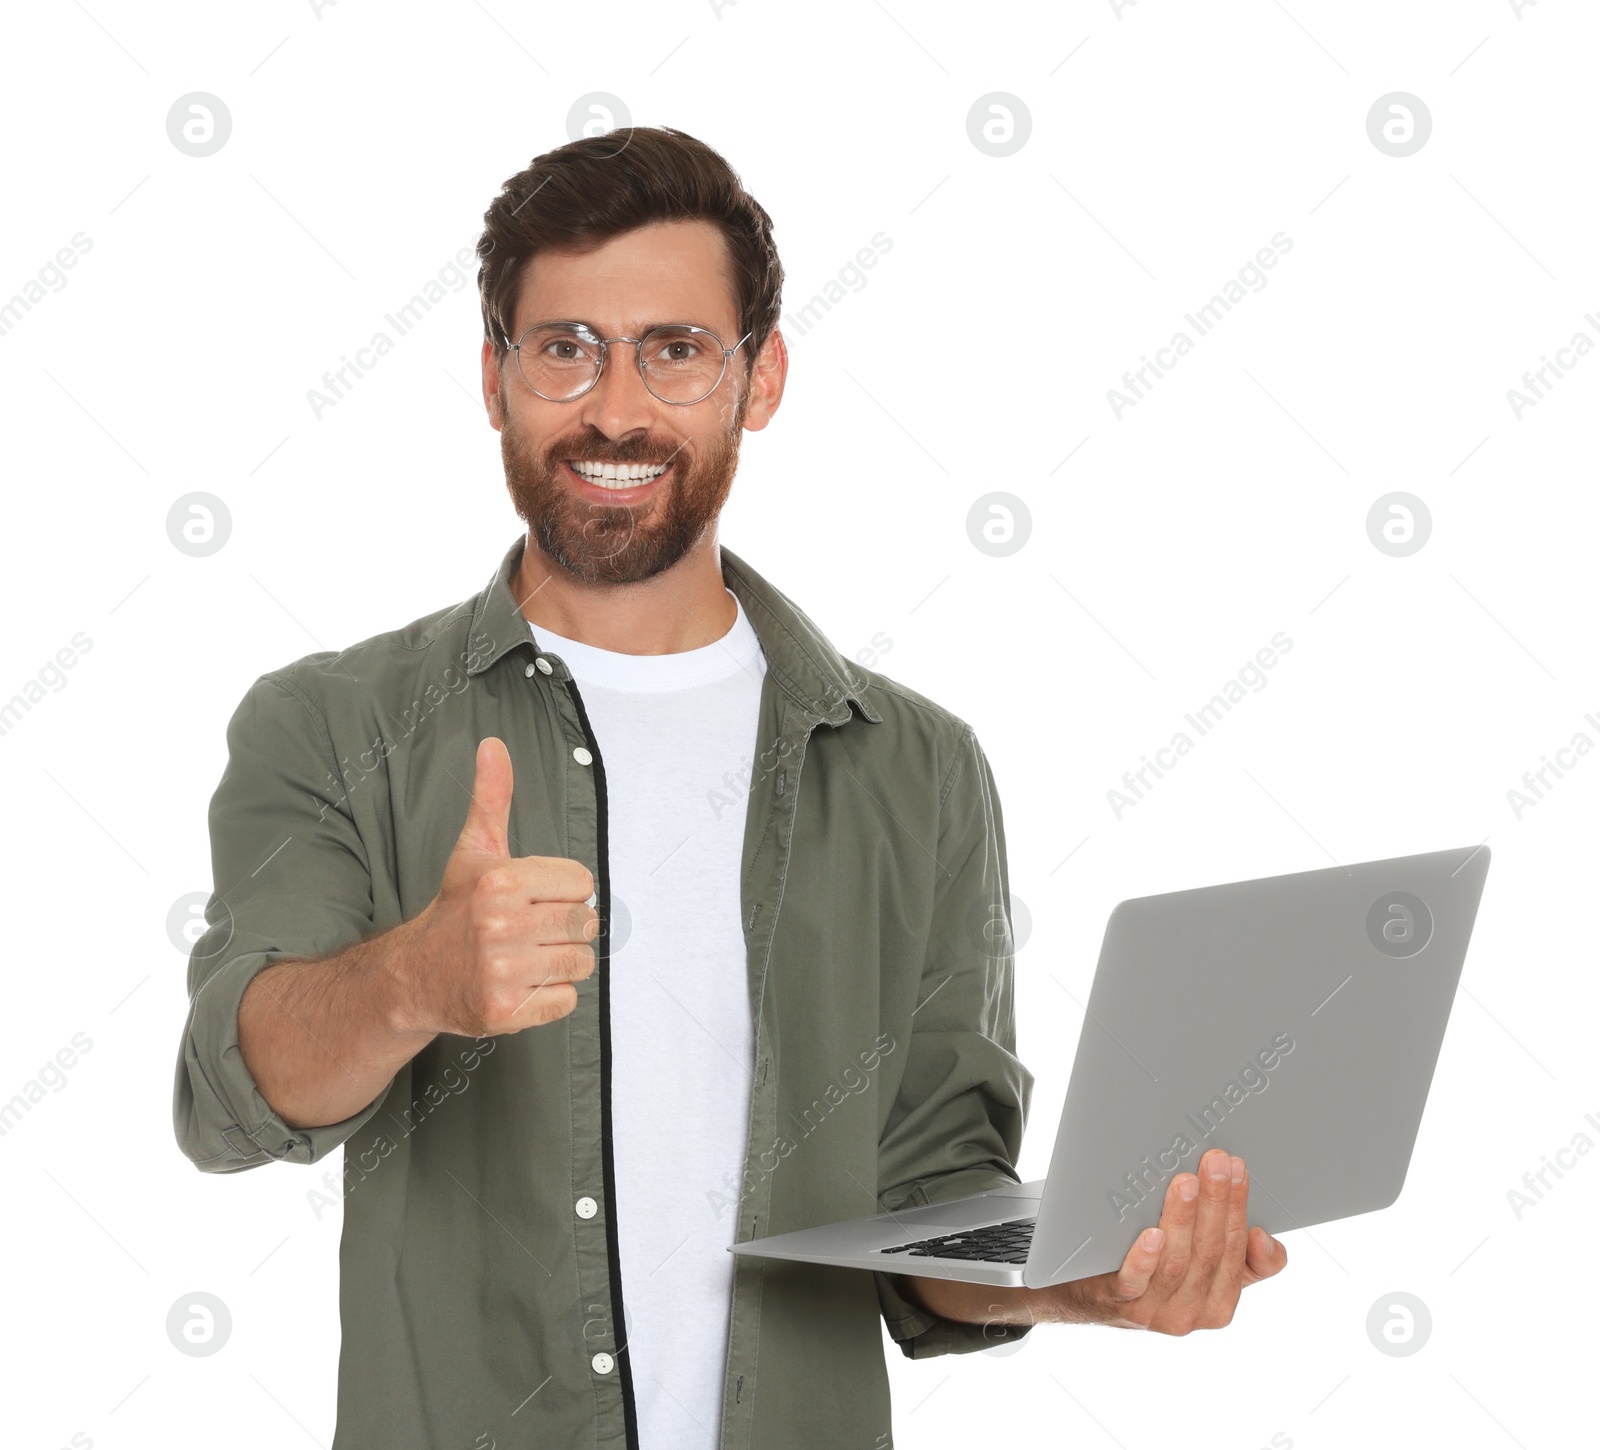 Photo of Handsome man with laptop showing thumb up gesture on white background